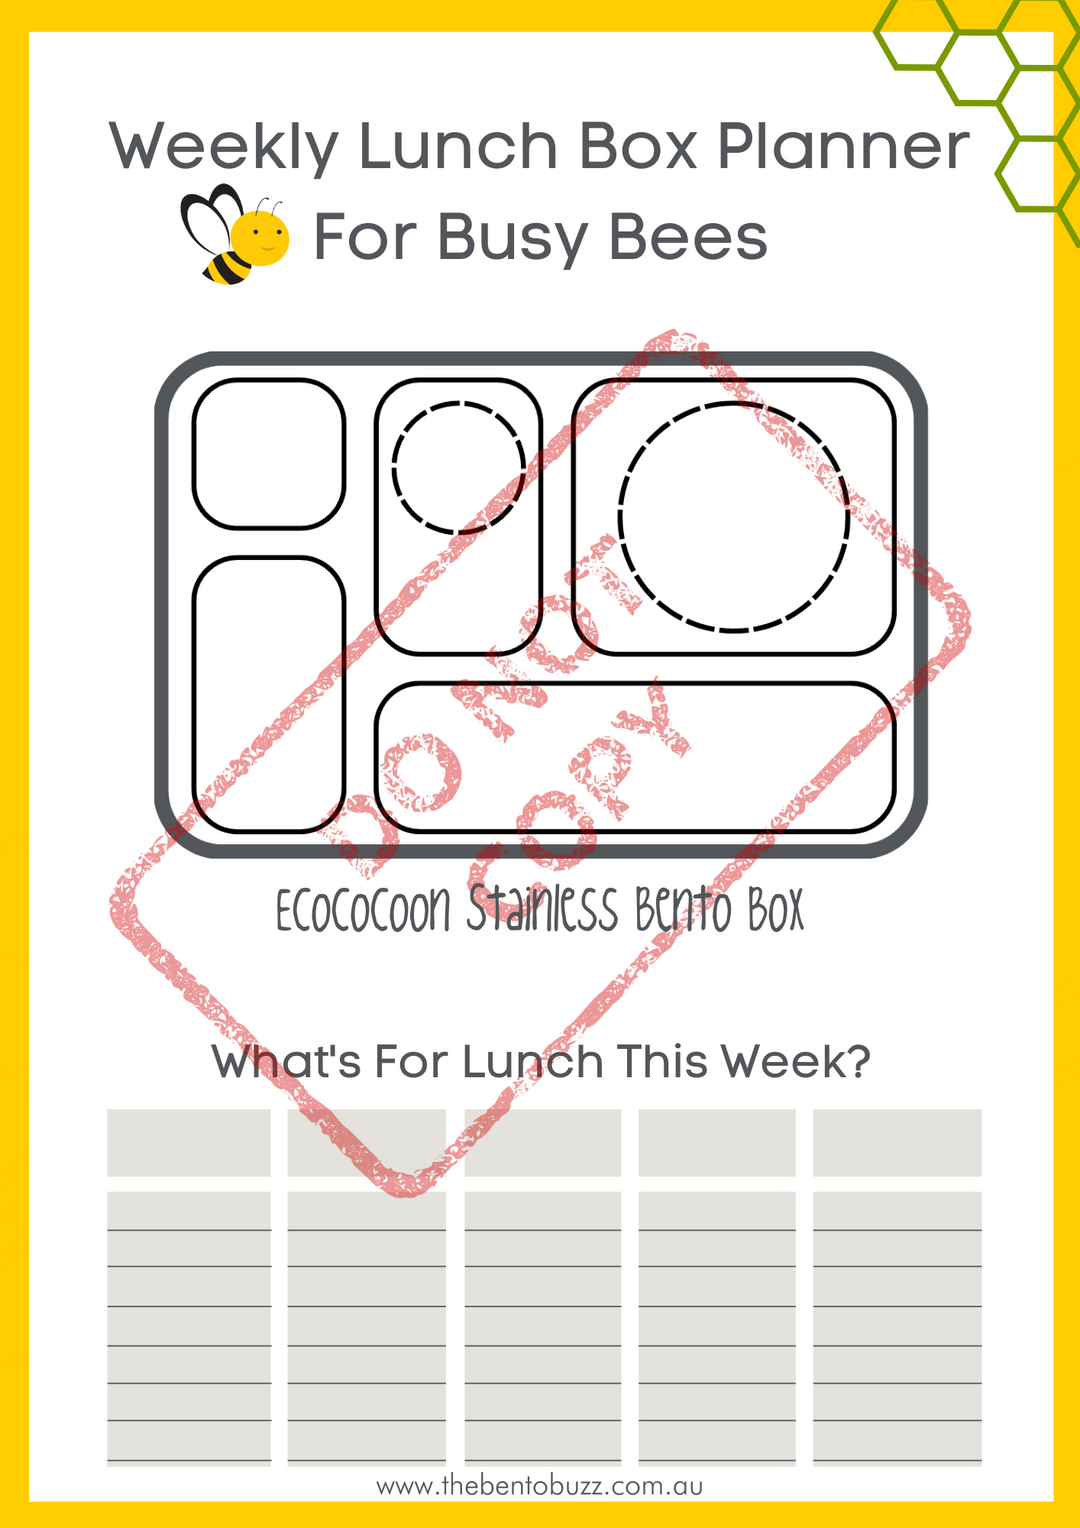 Download & Print Lunch Box Planner - Ecococoon Stainless